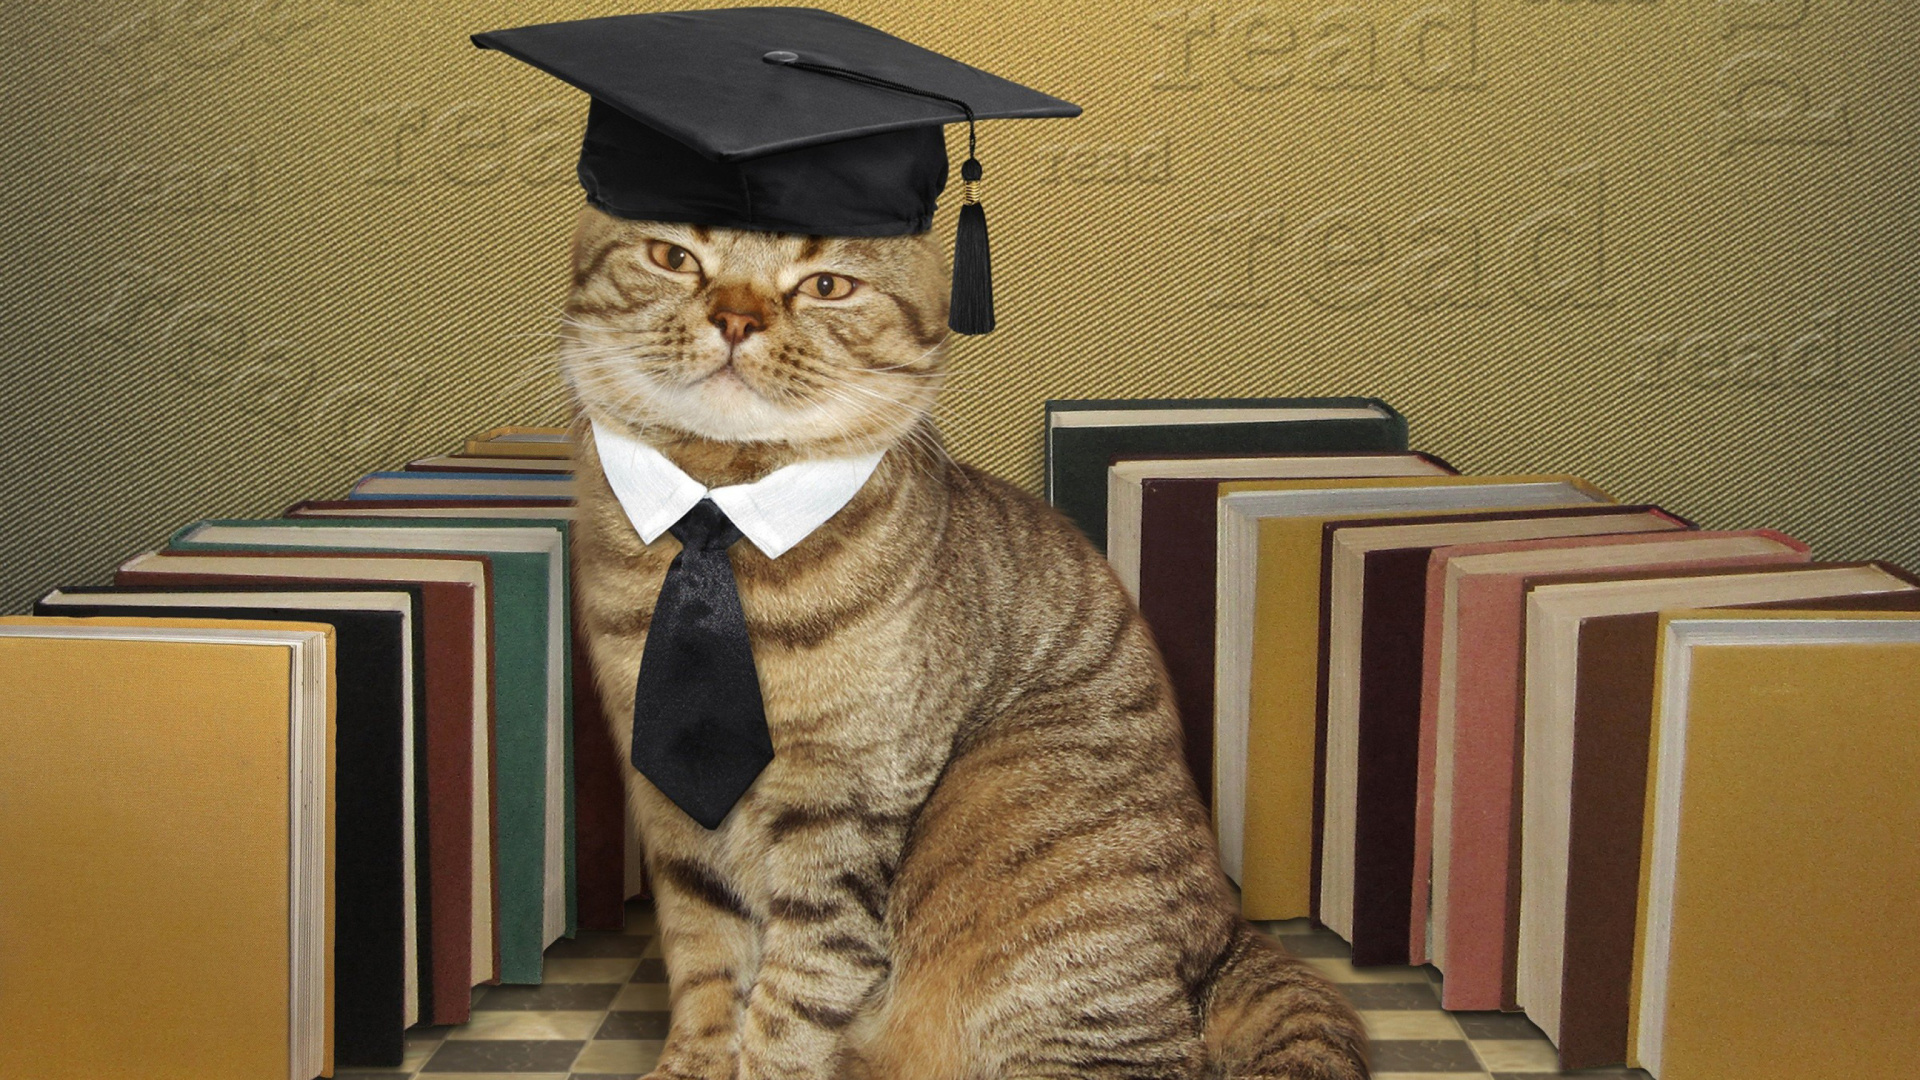 Das Clever cat with Books Wallpaper 1920x1080